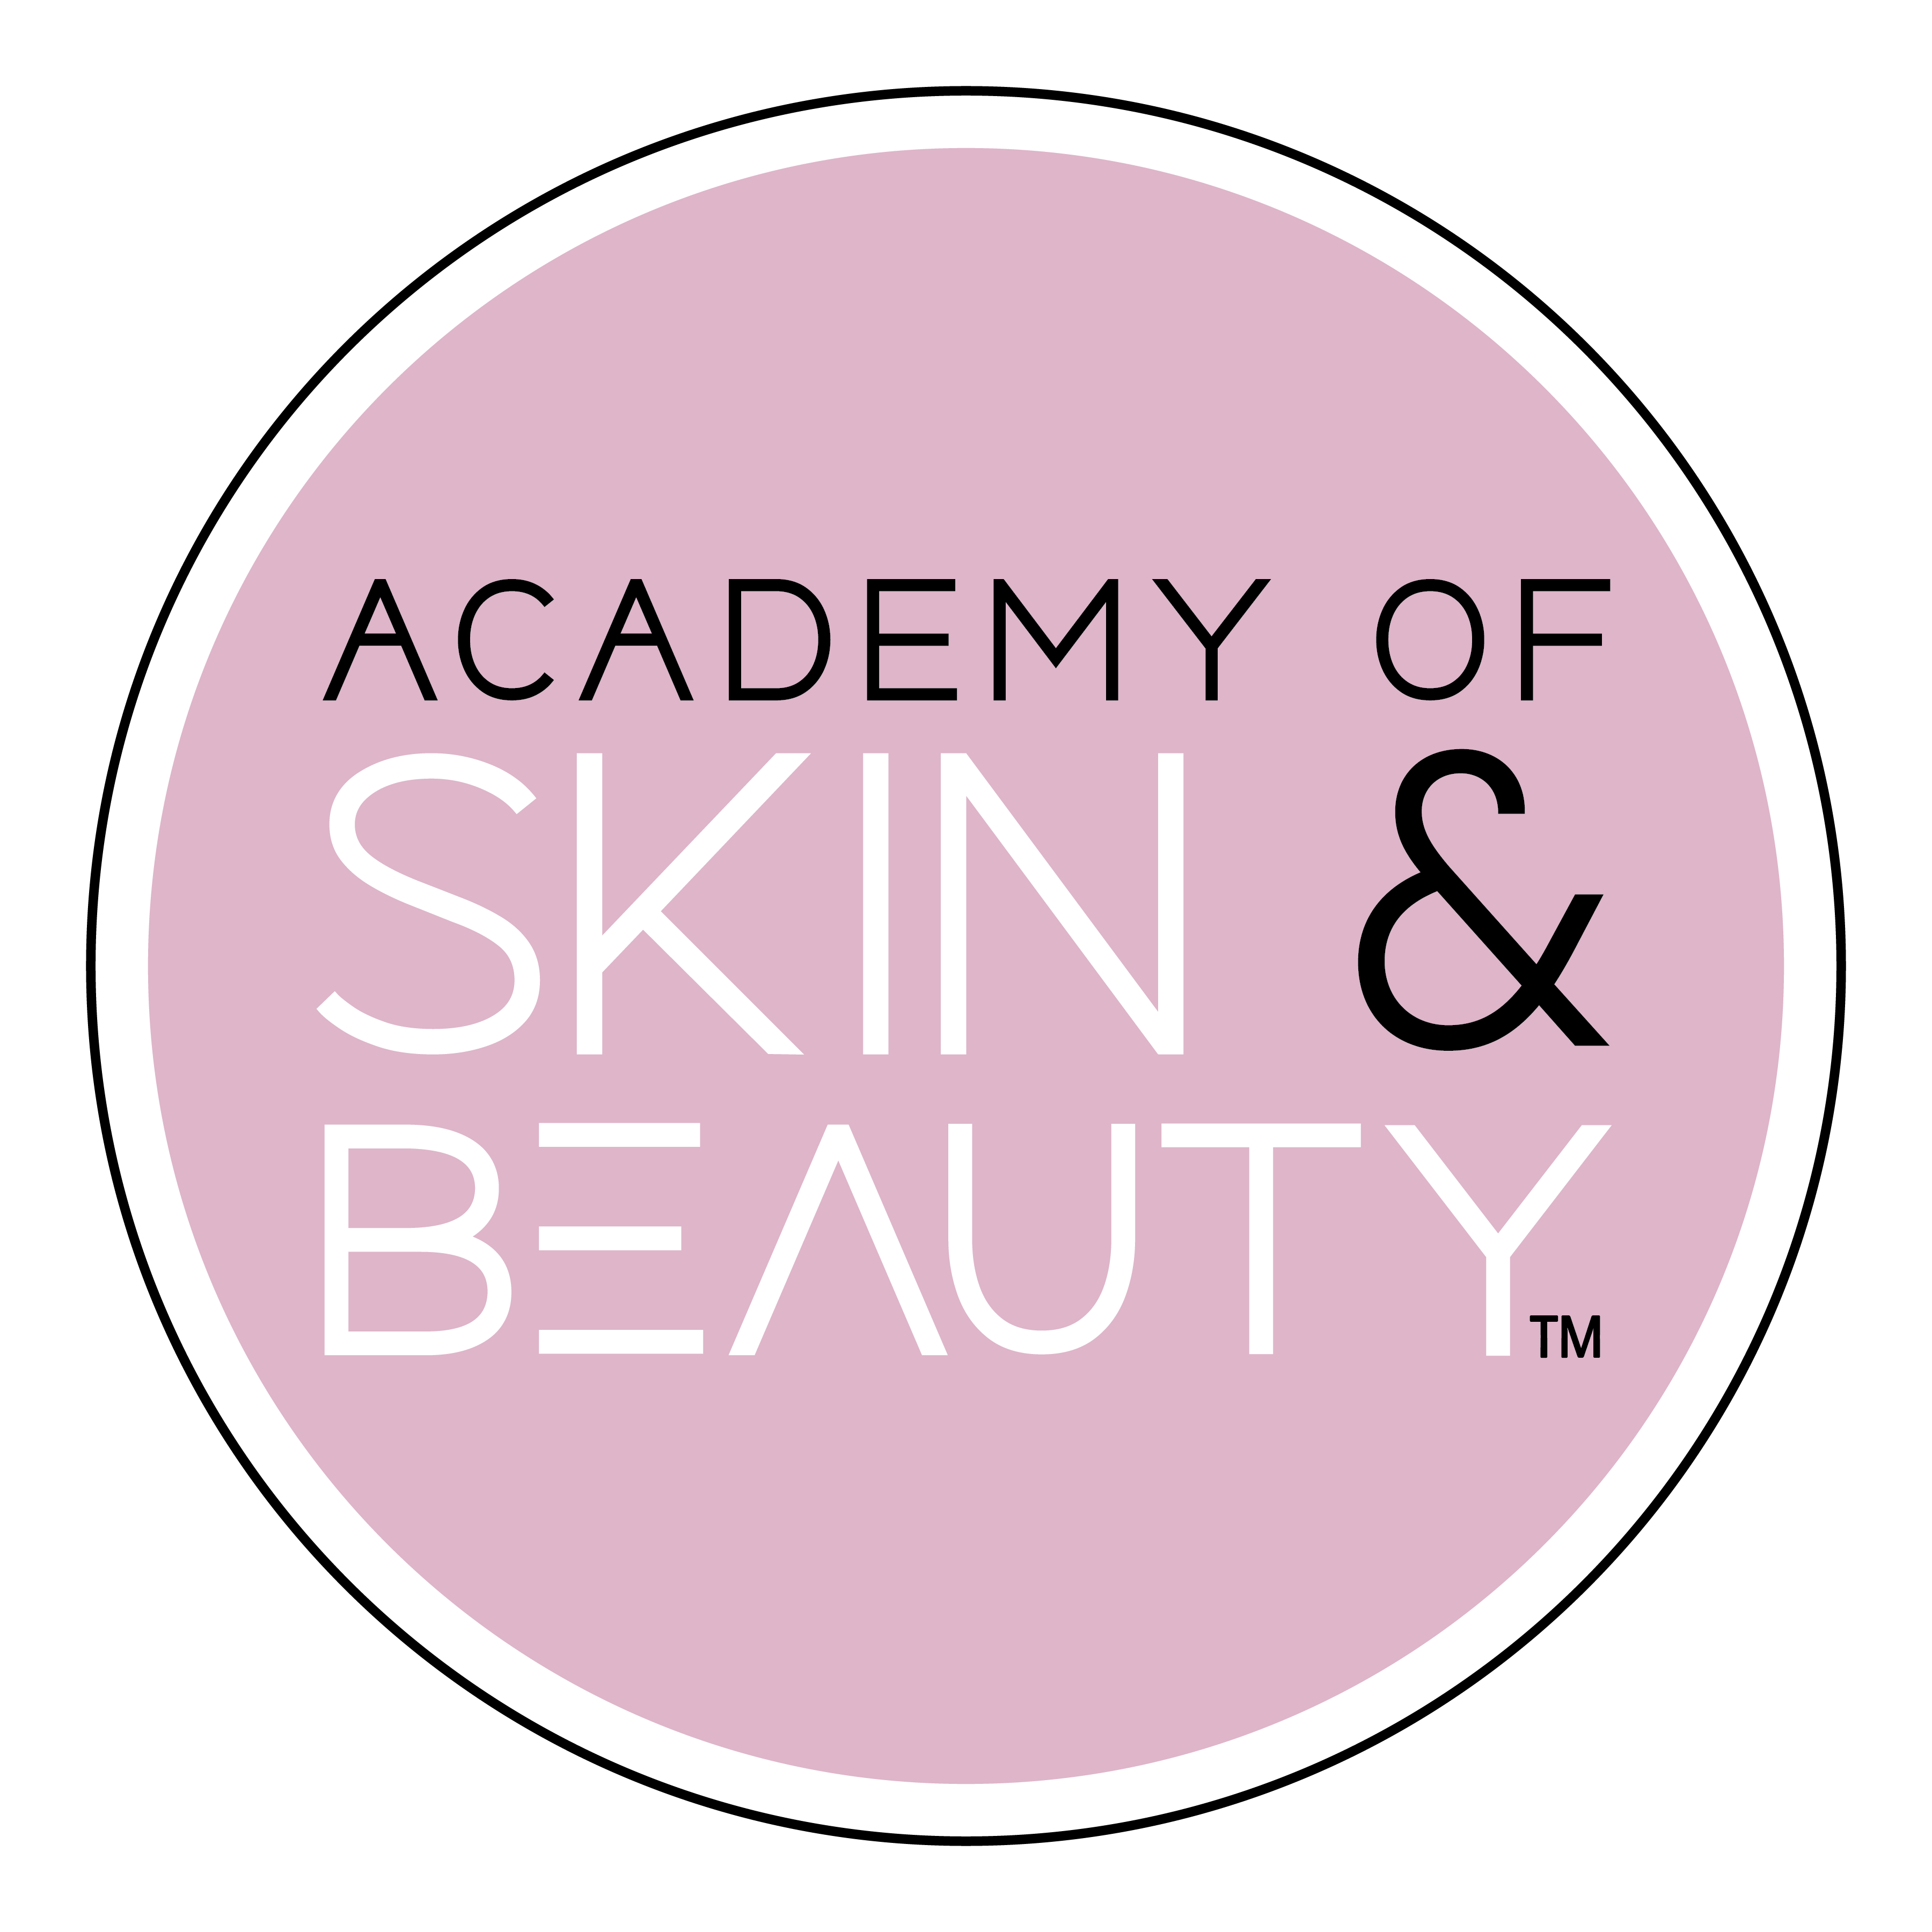 Academy of Skin and Beauty